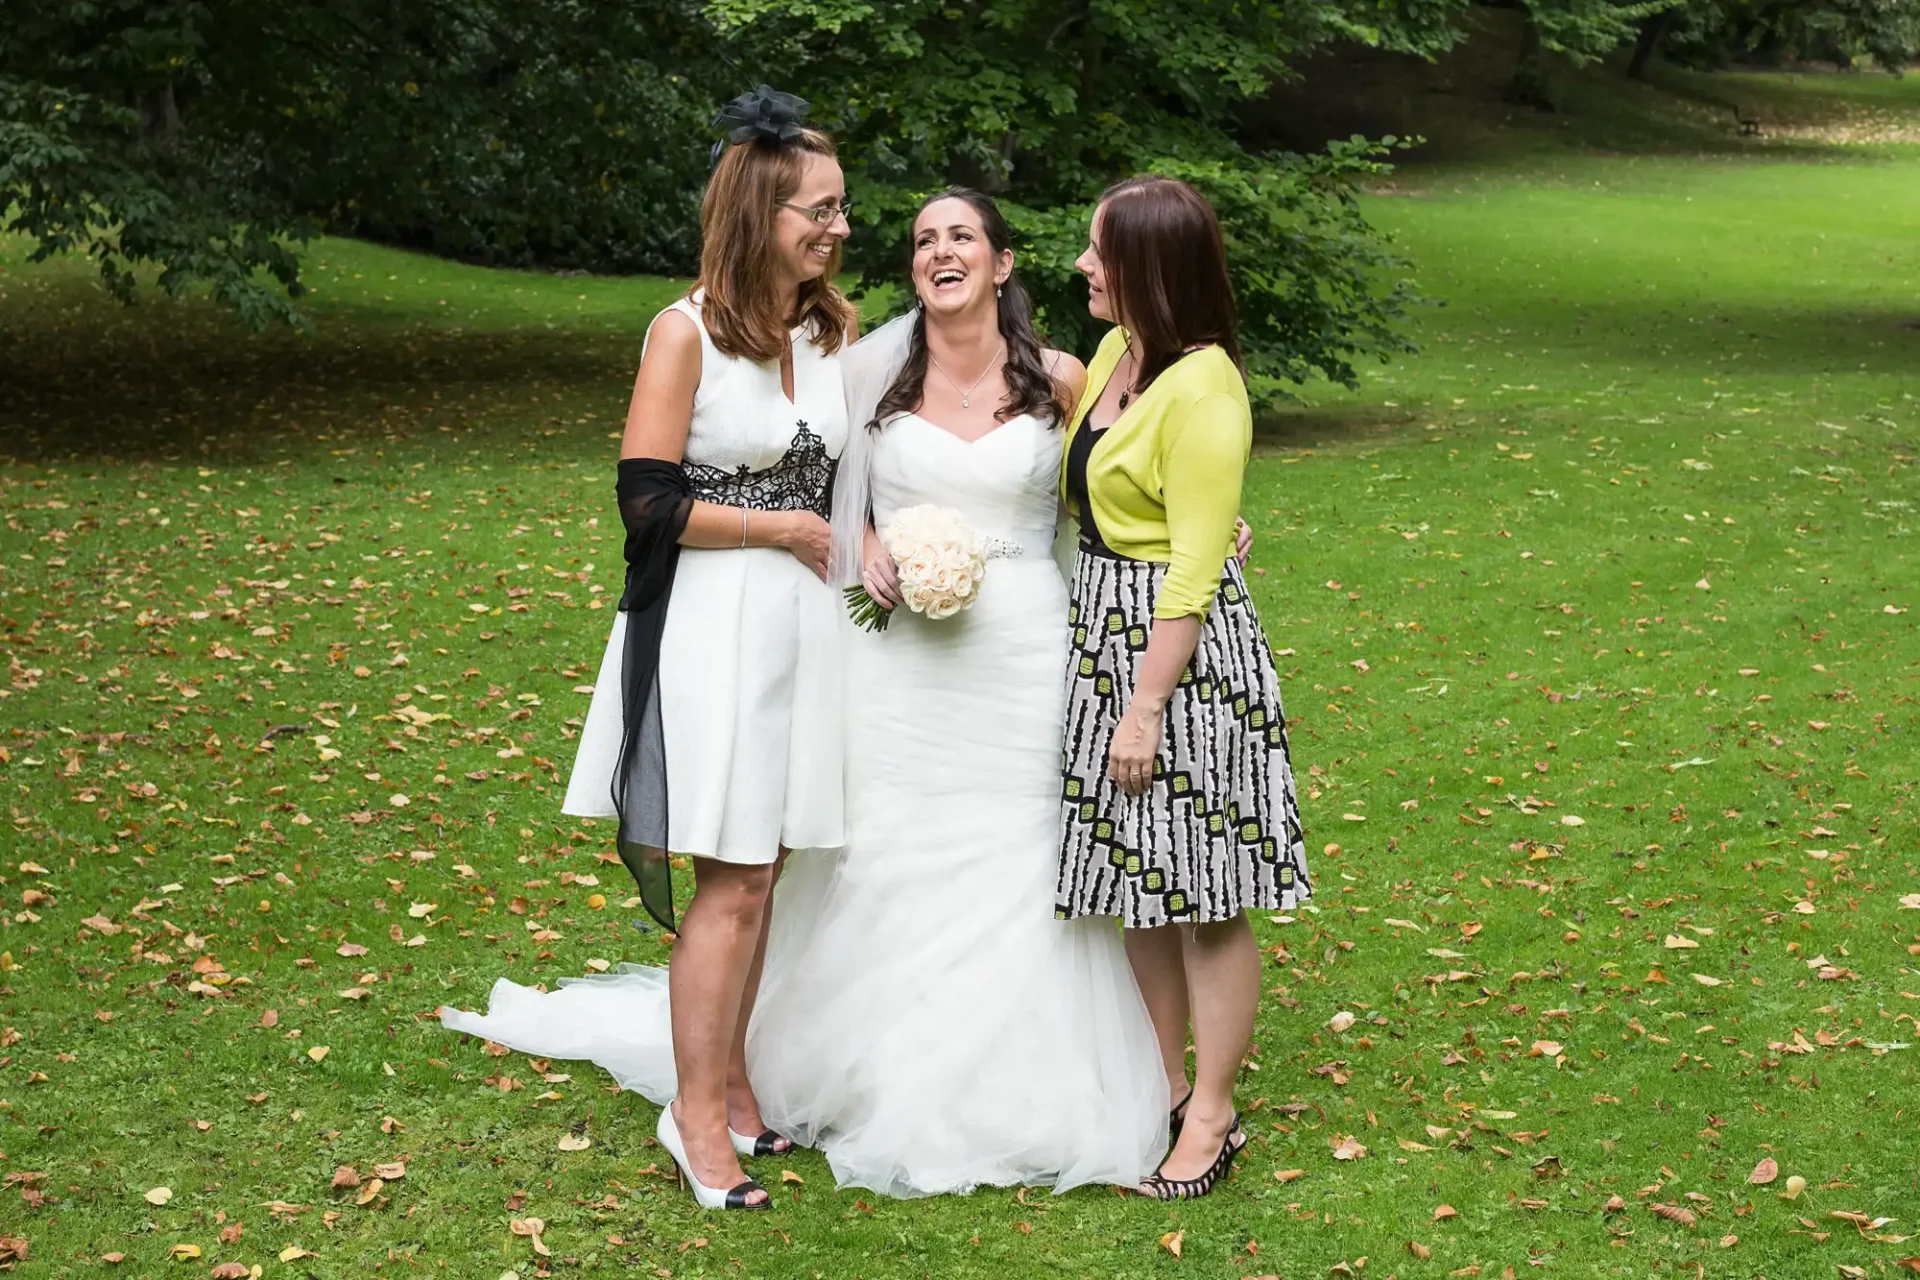 Three women, one in a white wedding dress, laugh together in a lush park. the other two wear stylish dresses, one black and white, the other yellow.